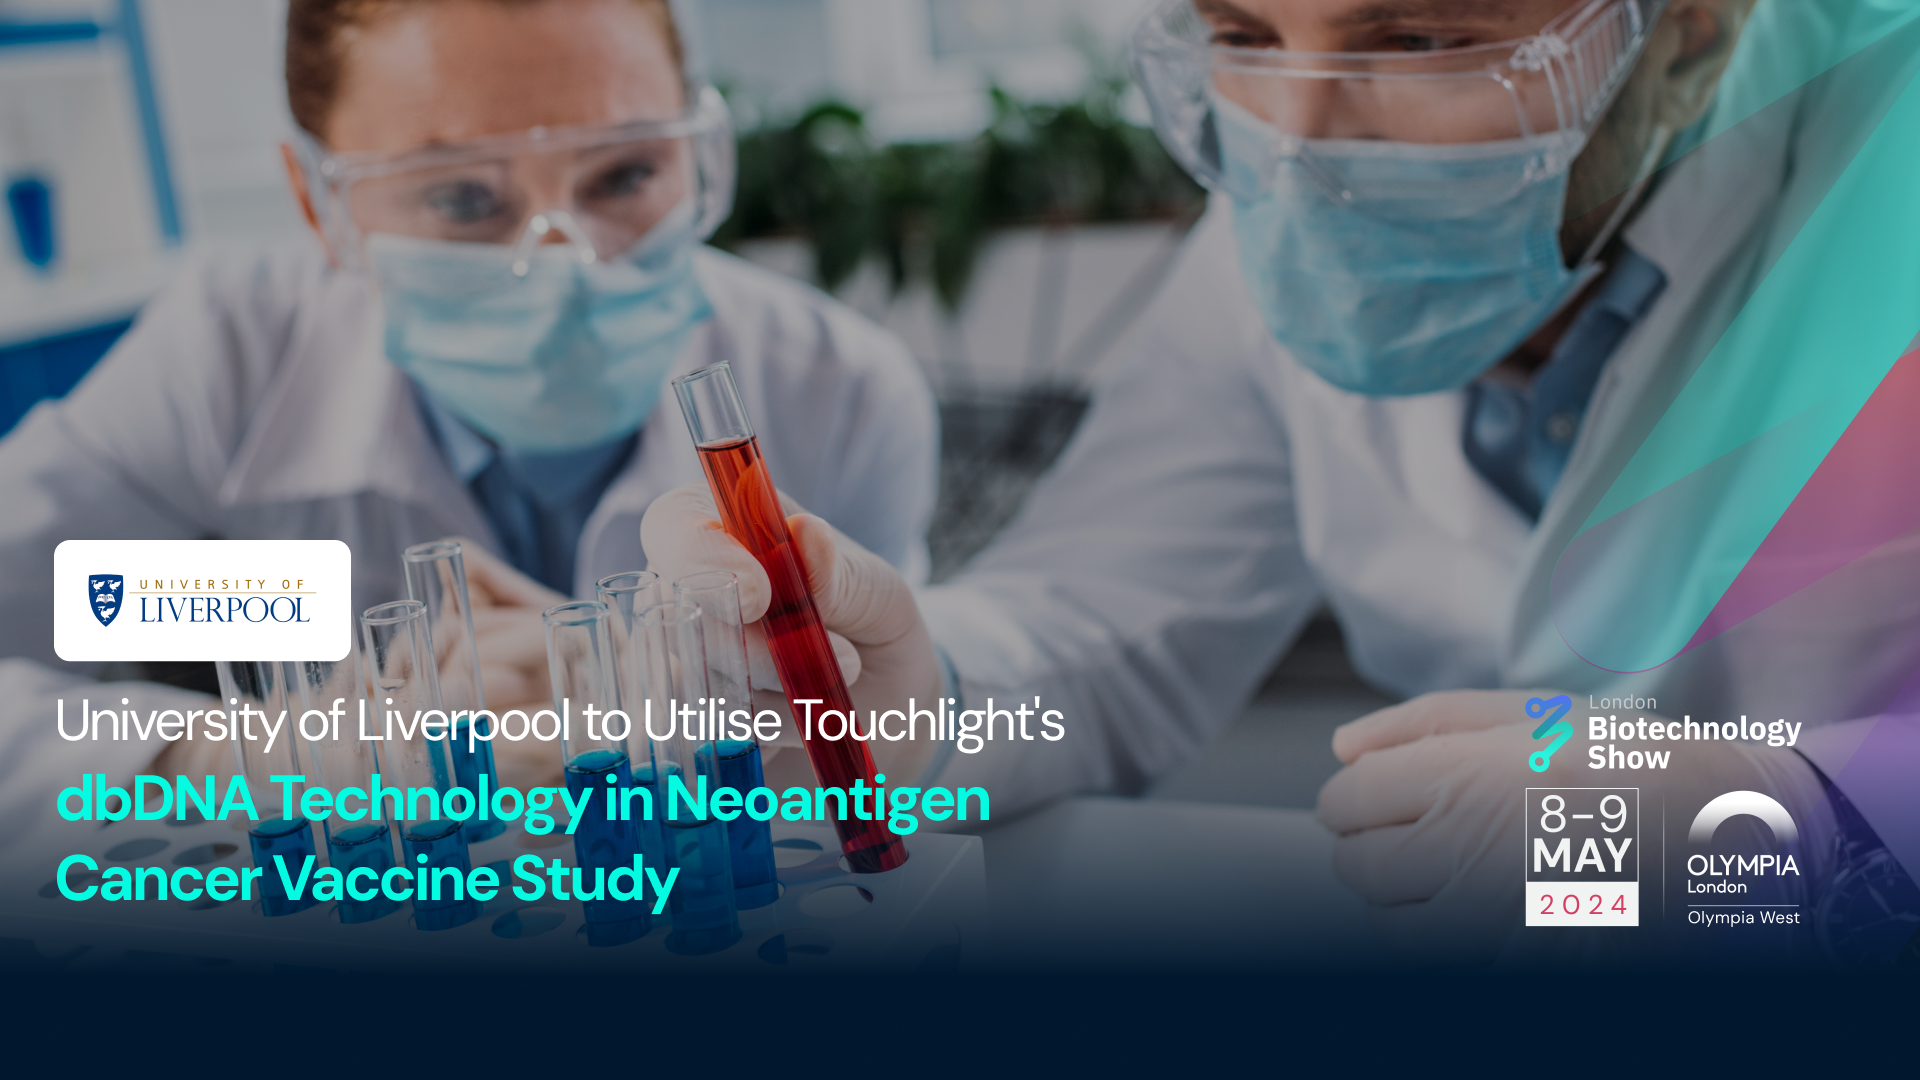 University of Liverpool to Utilise Touchlight's dbDNA Technology in Neoantigen Cancer Vaccine Study.